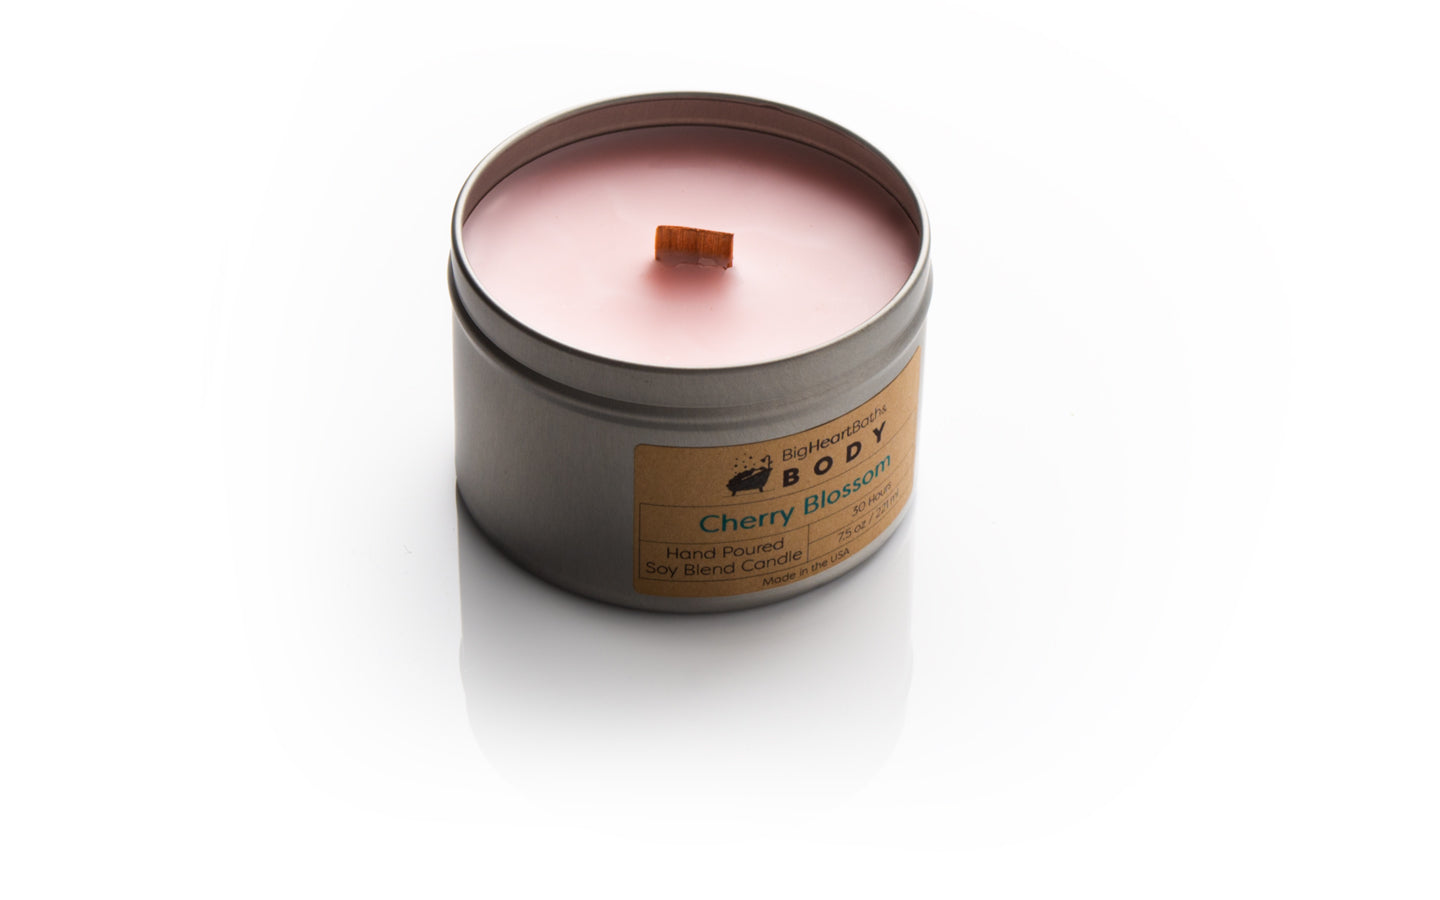 candle, wood wick candle, wooden wick candle, wood wick, scented candle, cherry blossom candle, soy candle, clean burn candle, cherry candle